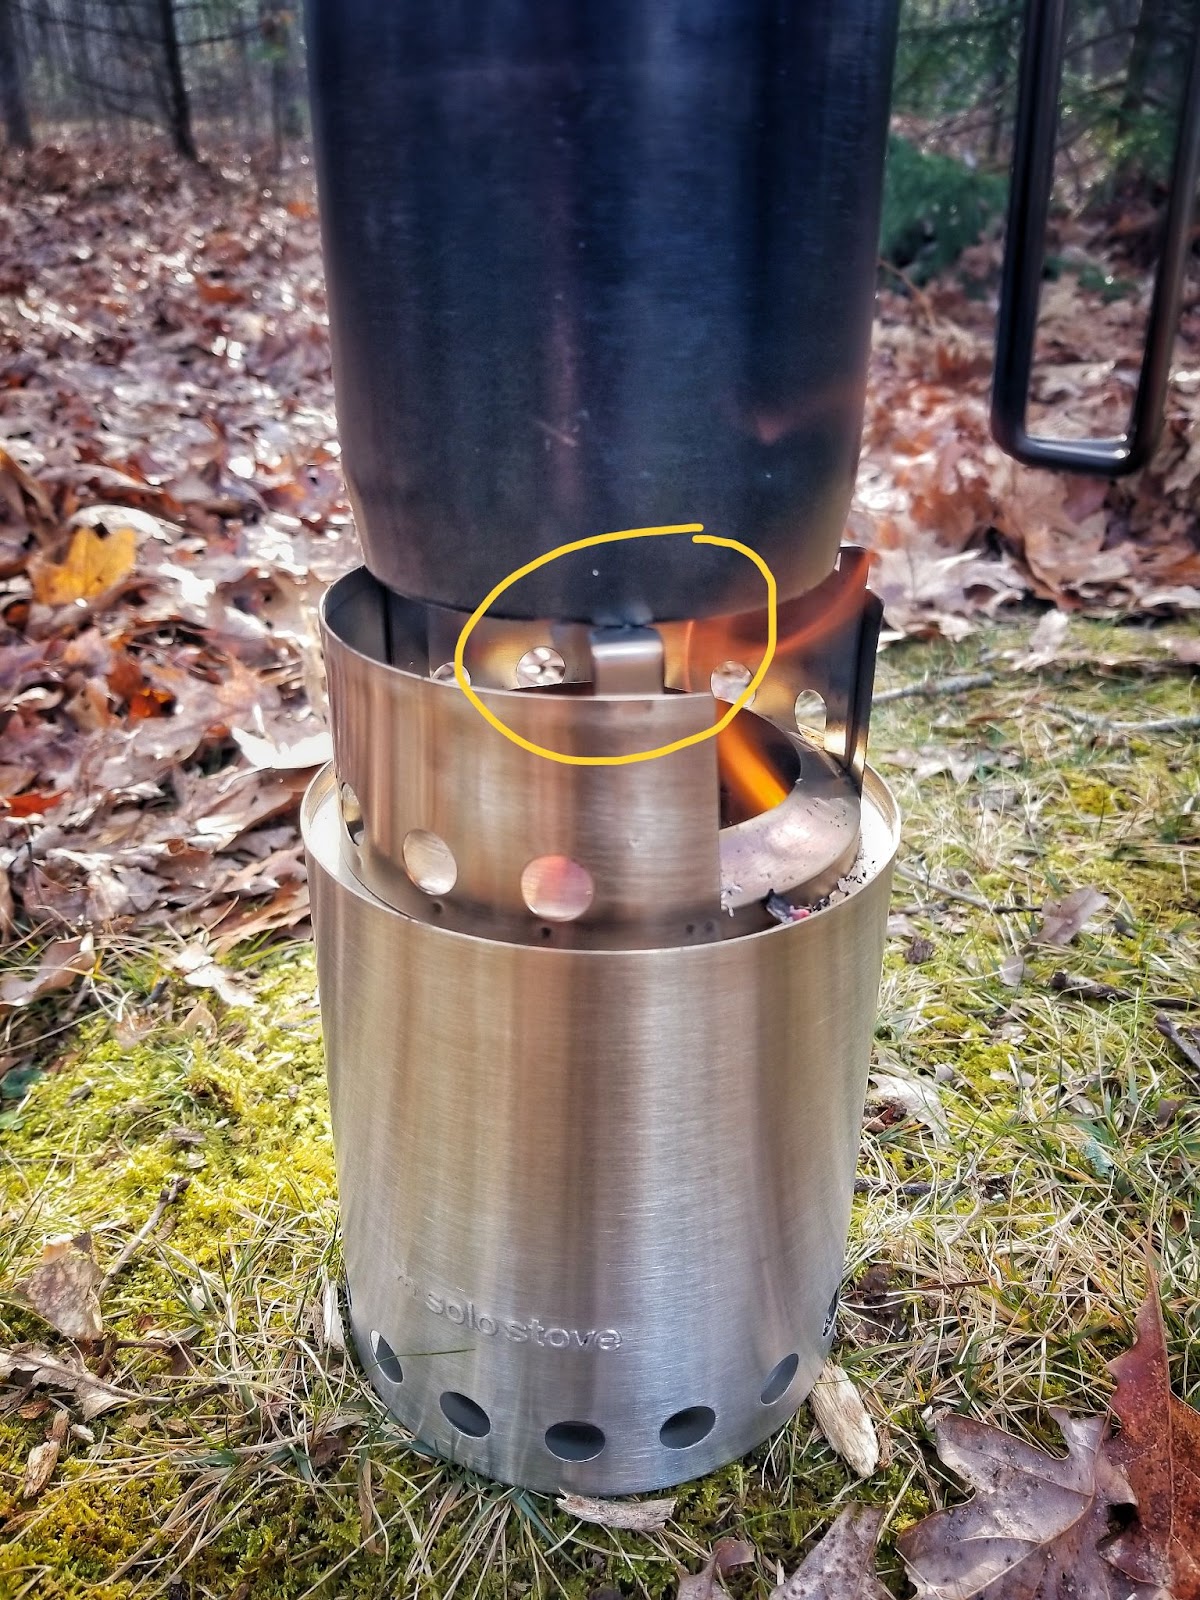 finding correct pot size for backpacking solo stove titan